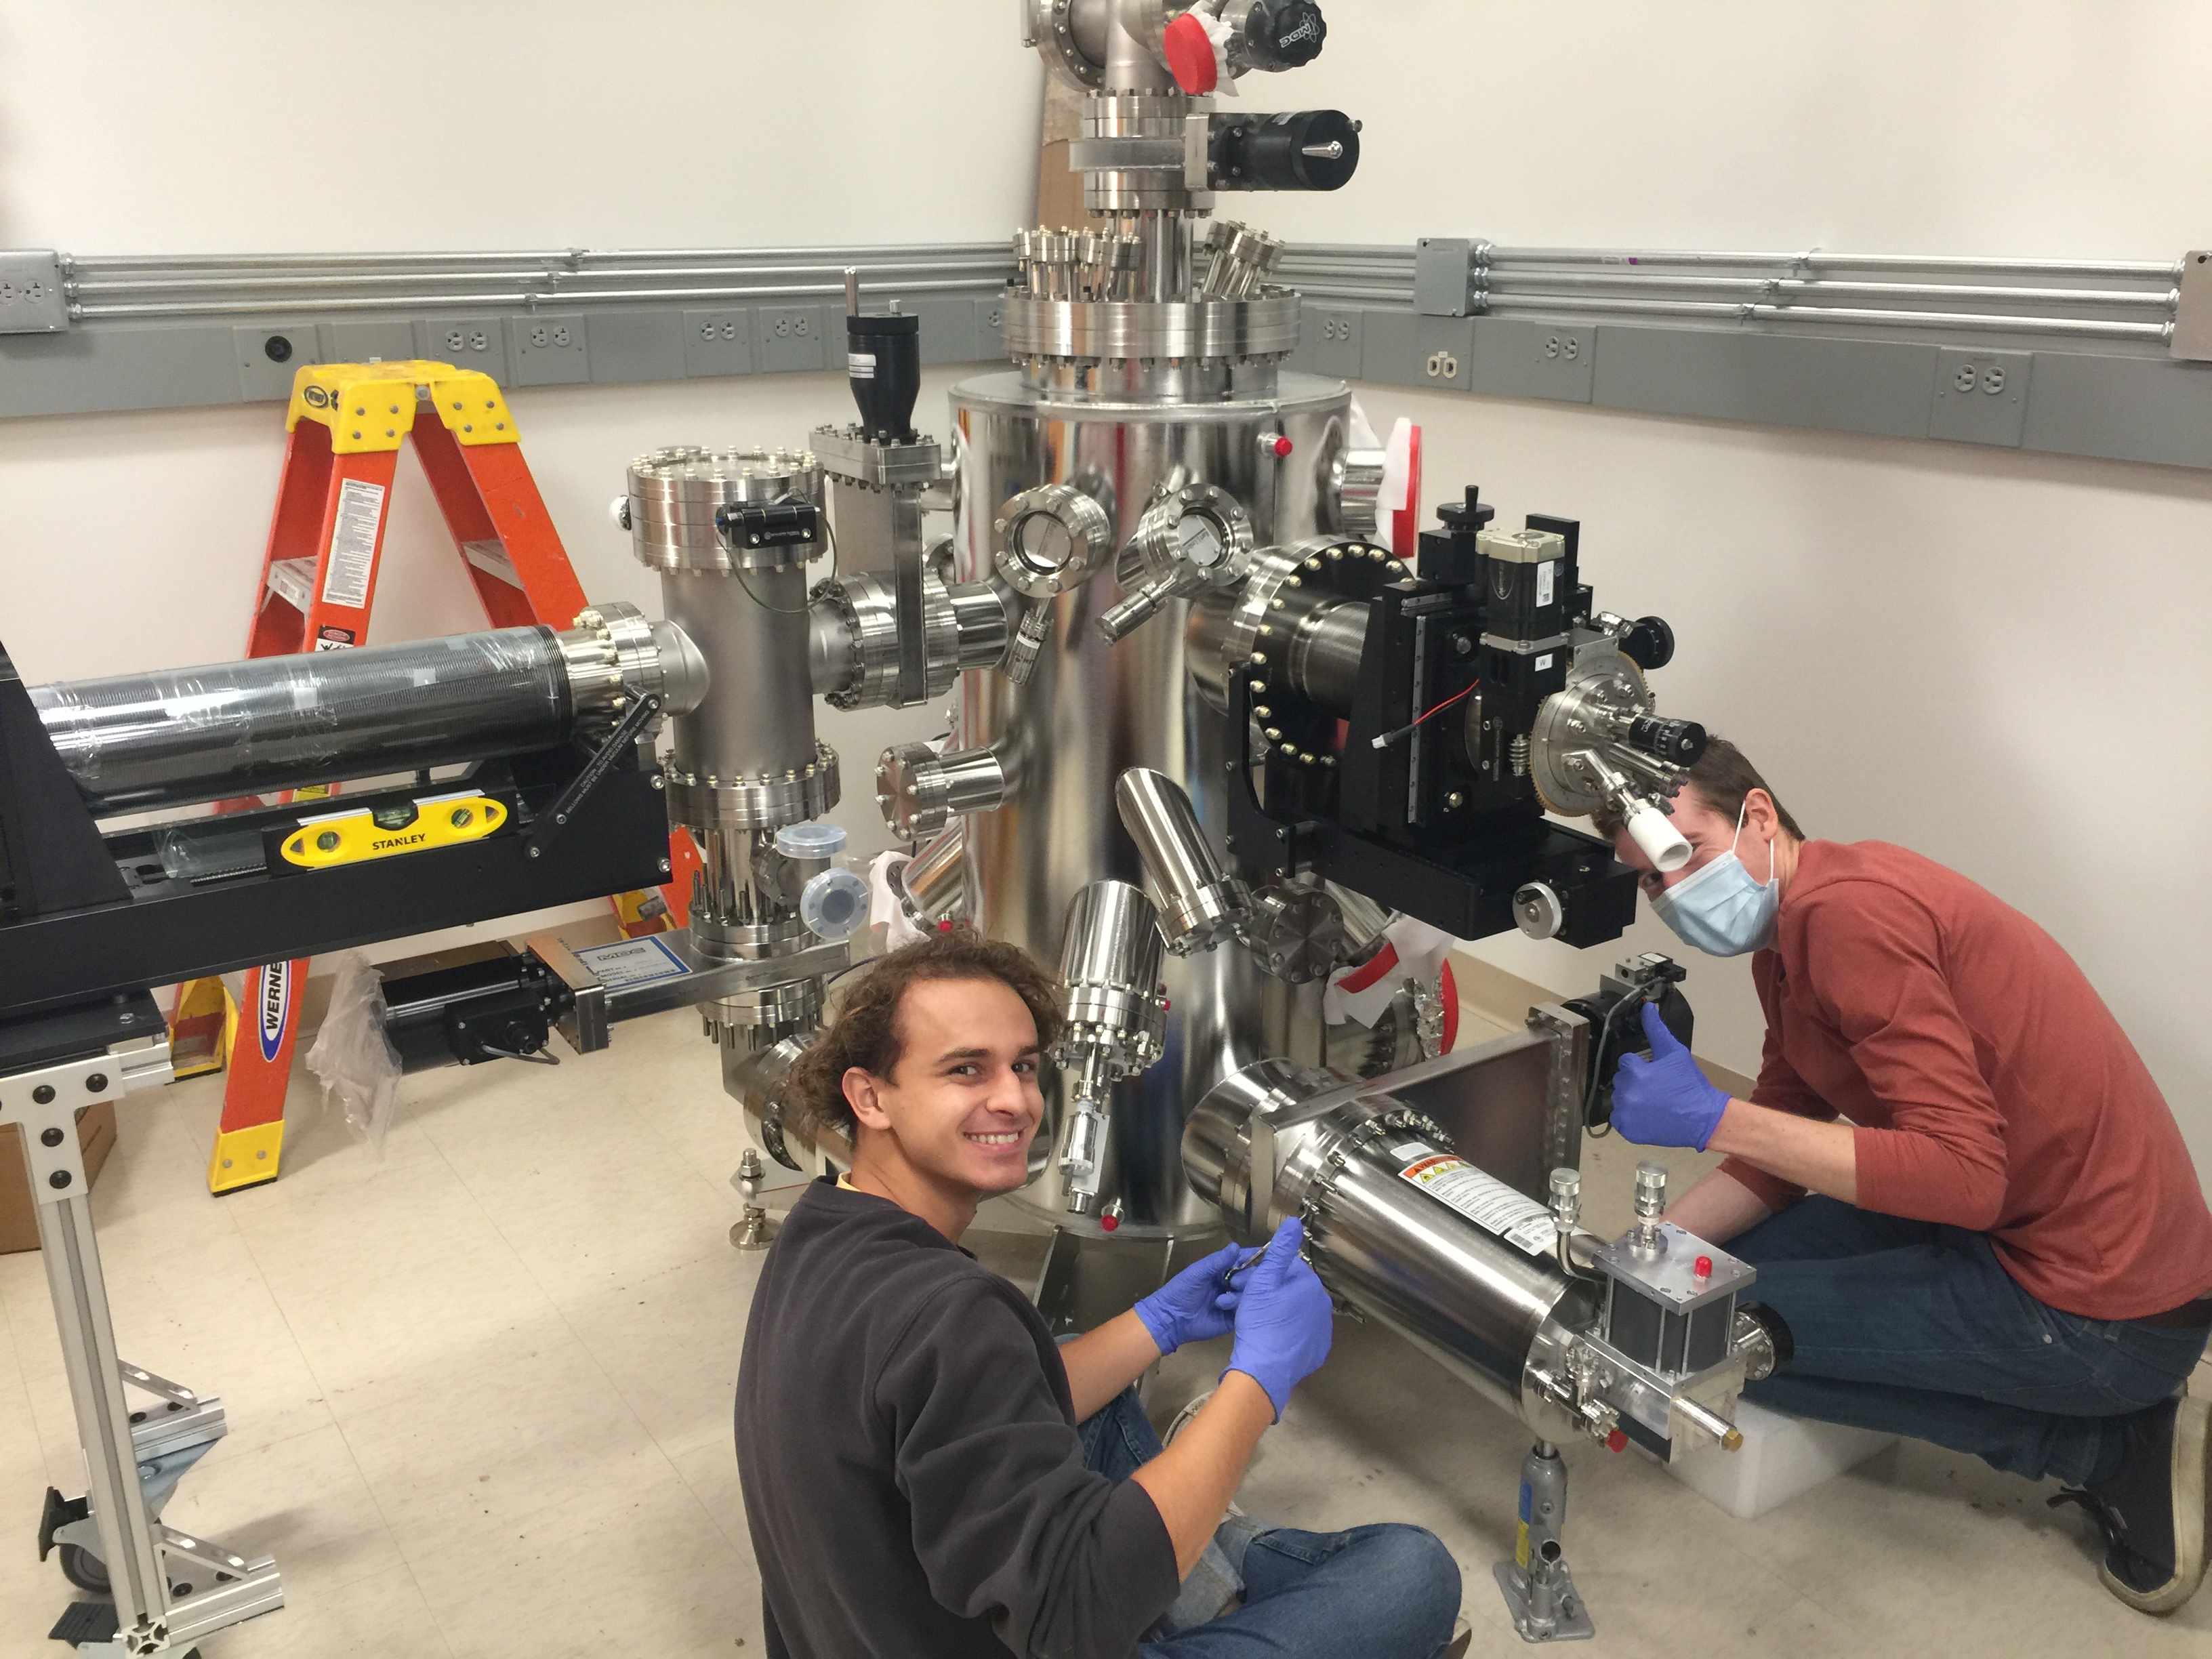 Linus (left) and Connor (right) work on adding components to the new vacuum chamber for the atomic imprint crystallization project